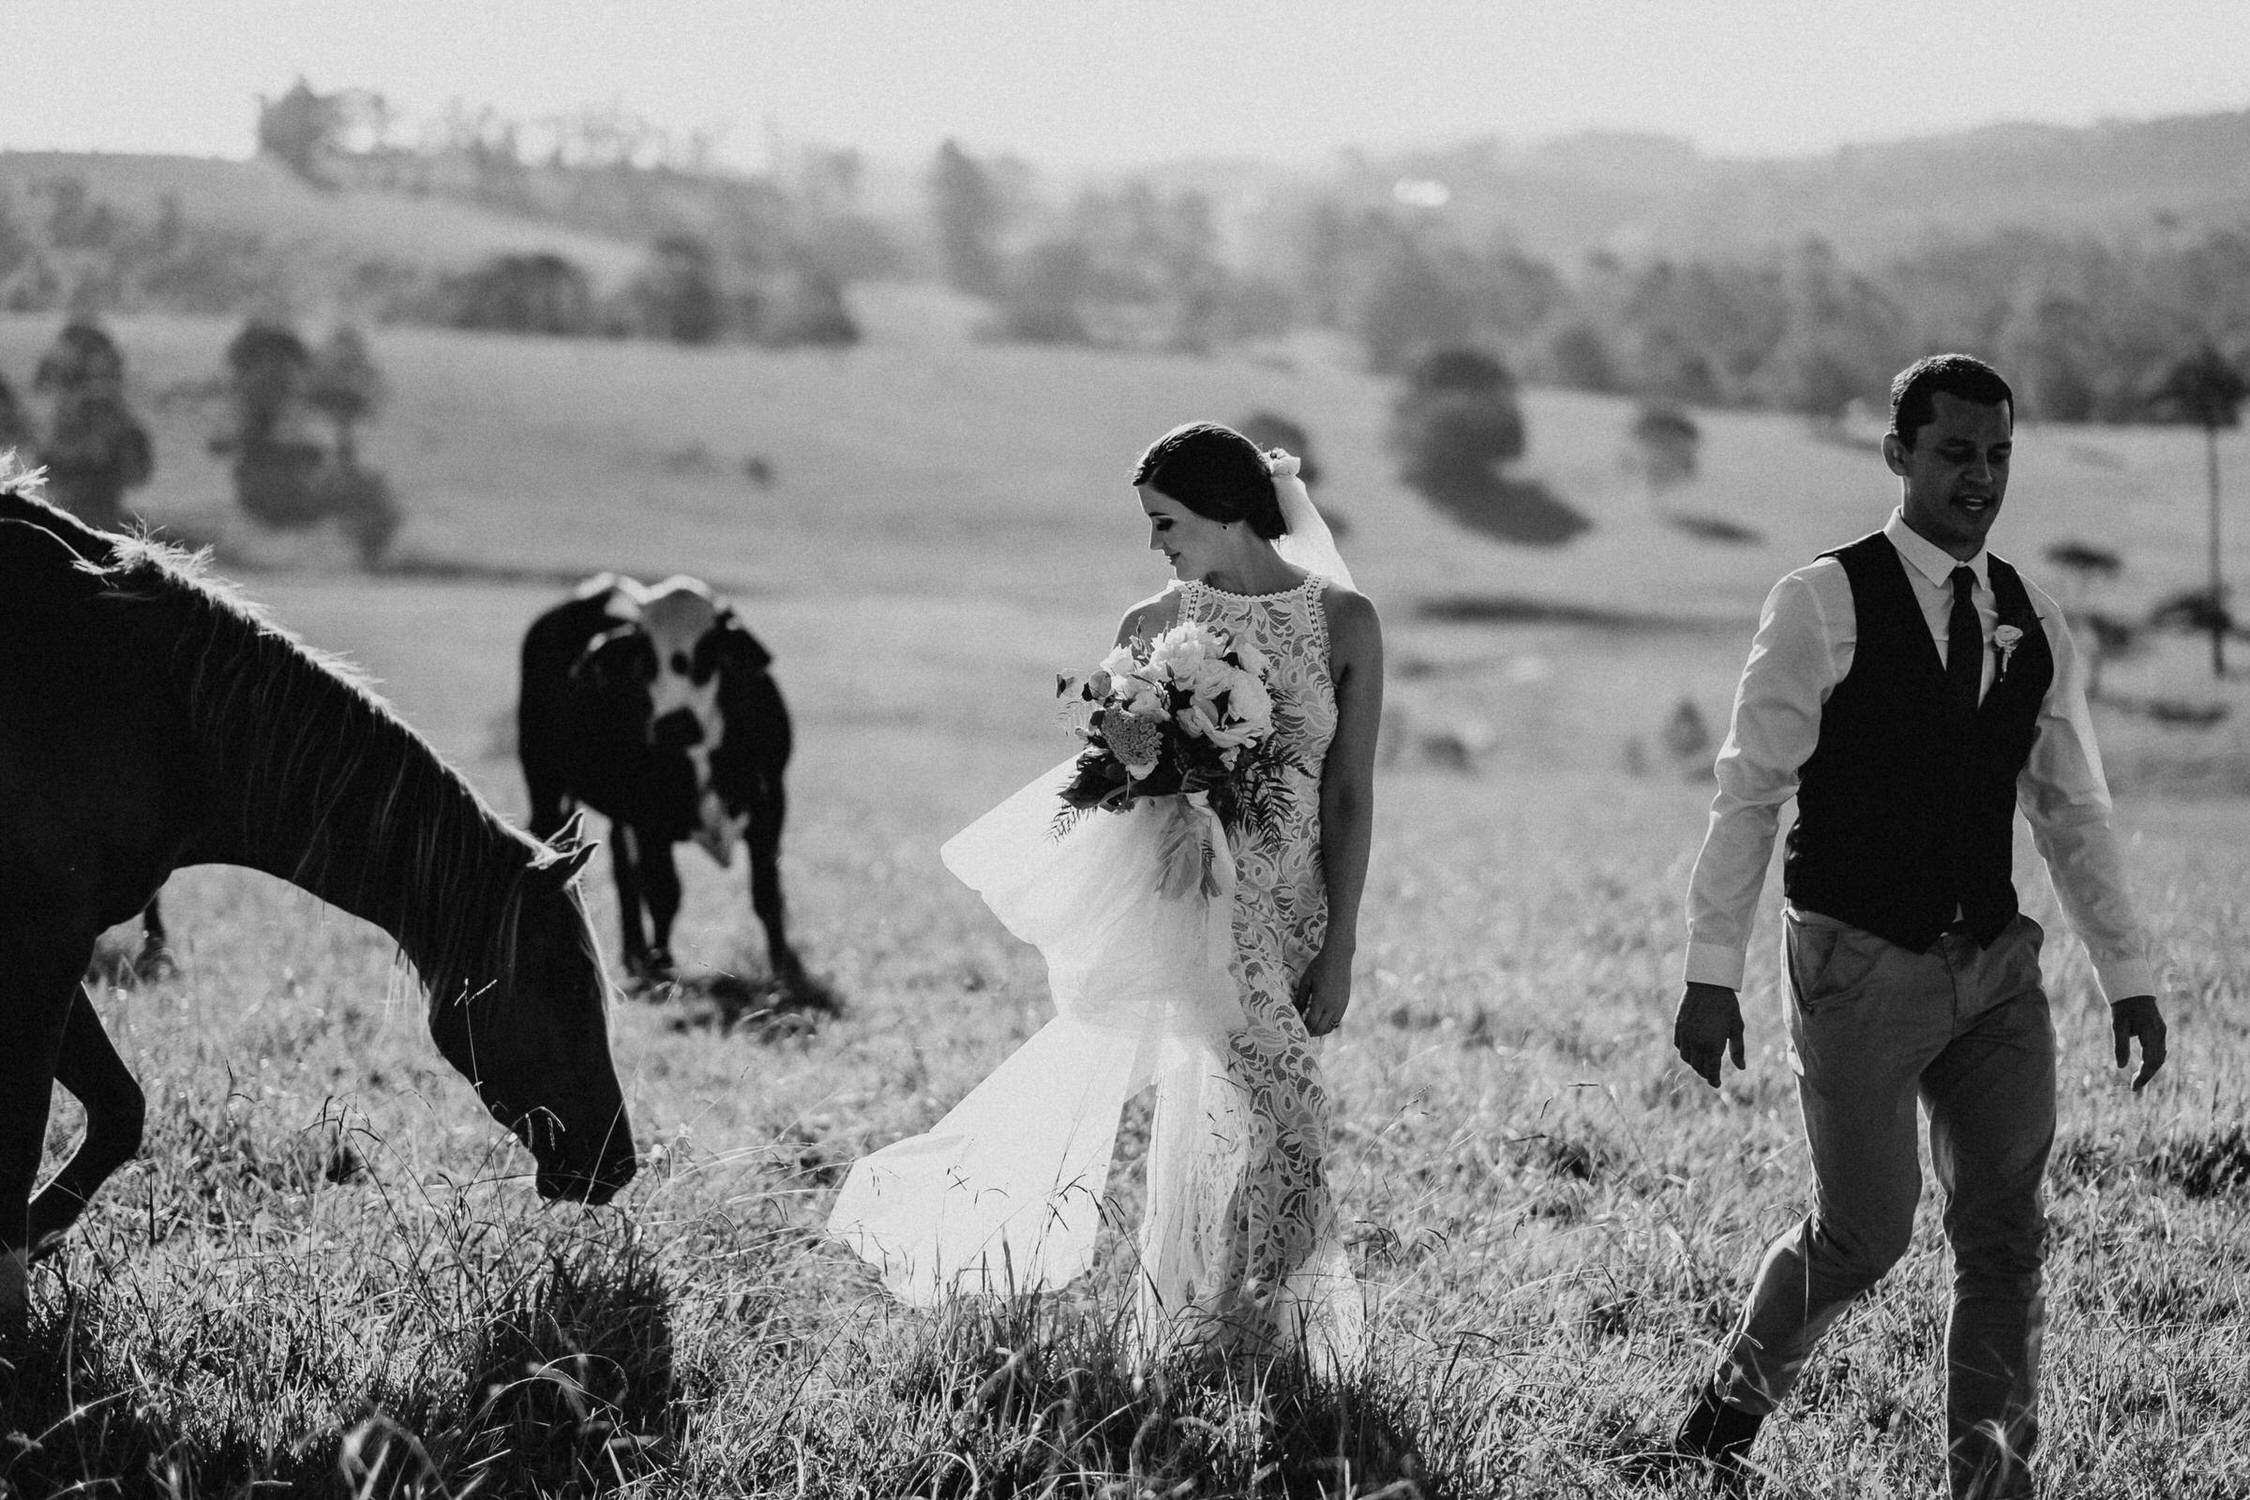 Bride and groom walking in the hills of Forget me Not farm near Byron Bay. The bride looks stunning in Grace Loves Lace wedding gown. The bride looks back over her shoulder smiling at a friendly horse that is following them.